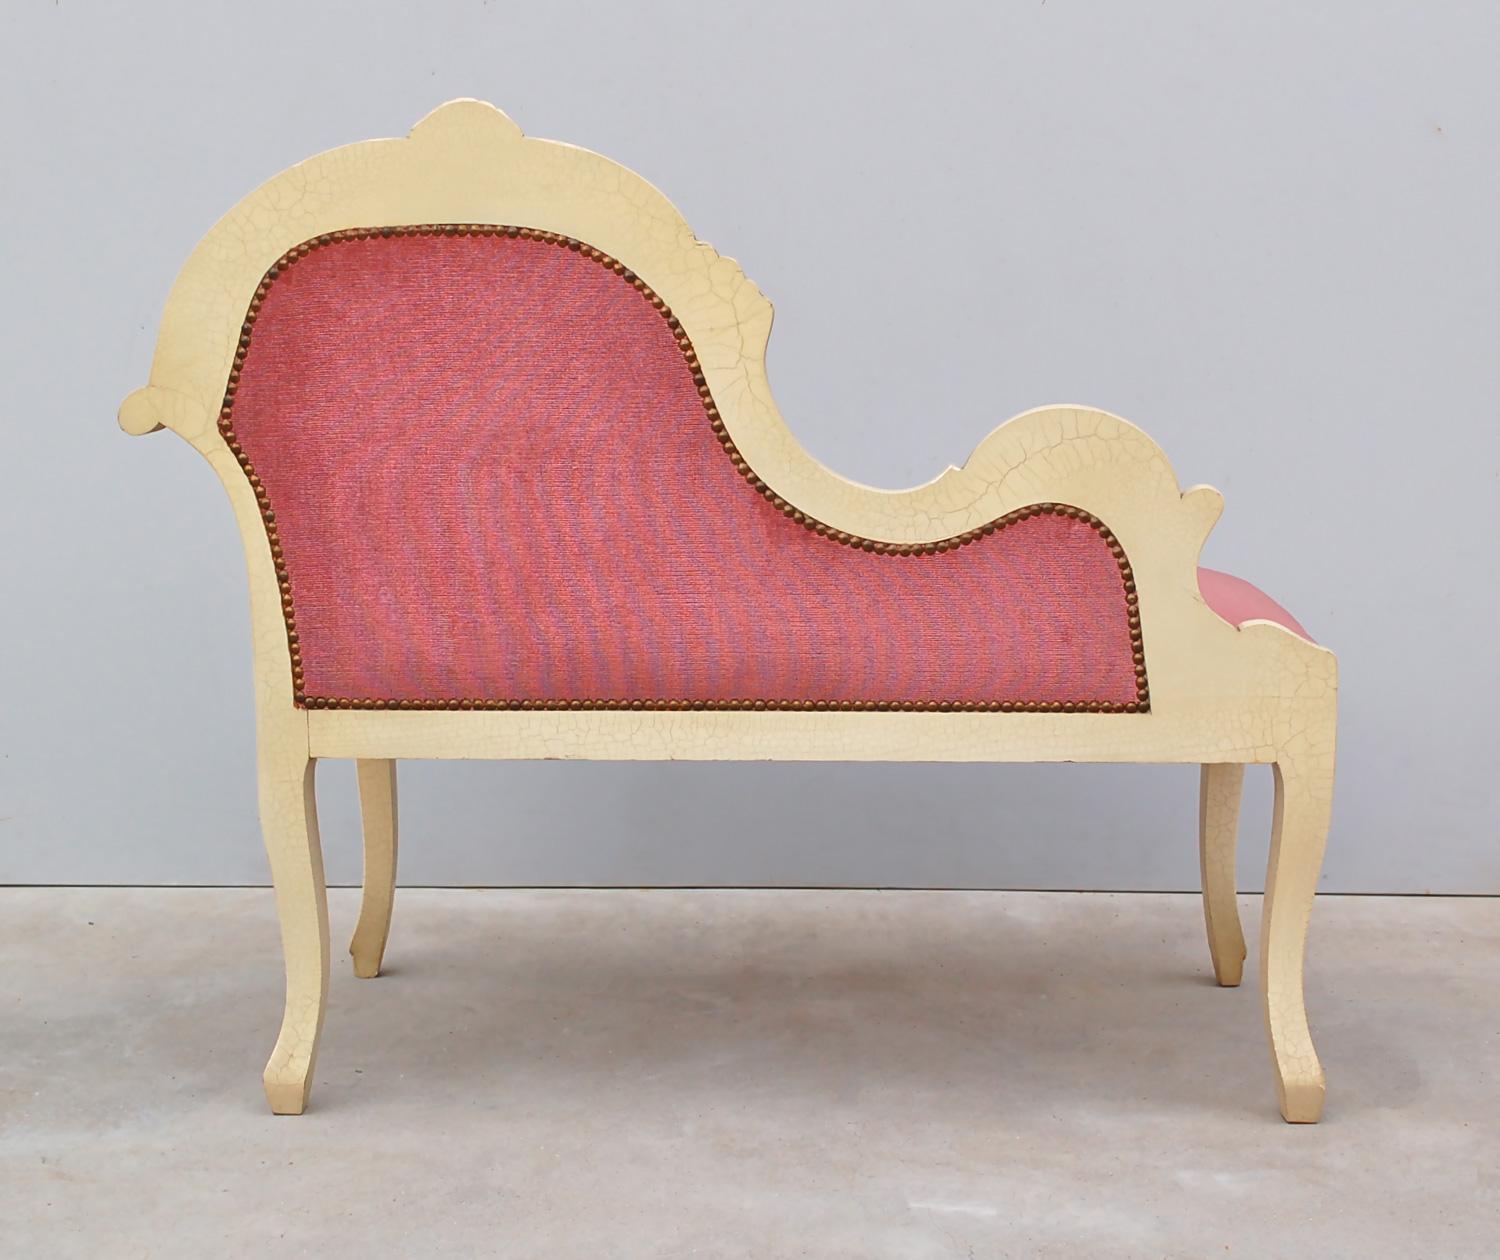 Louis XIV Style Banquette in Dusty Pink, 1950s, France (Samt) im Angebot